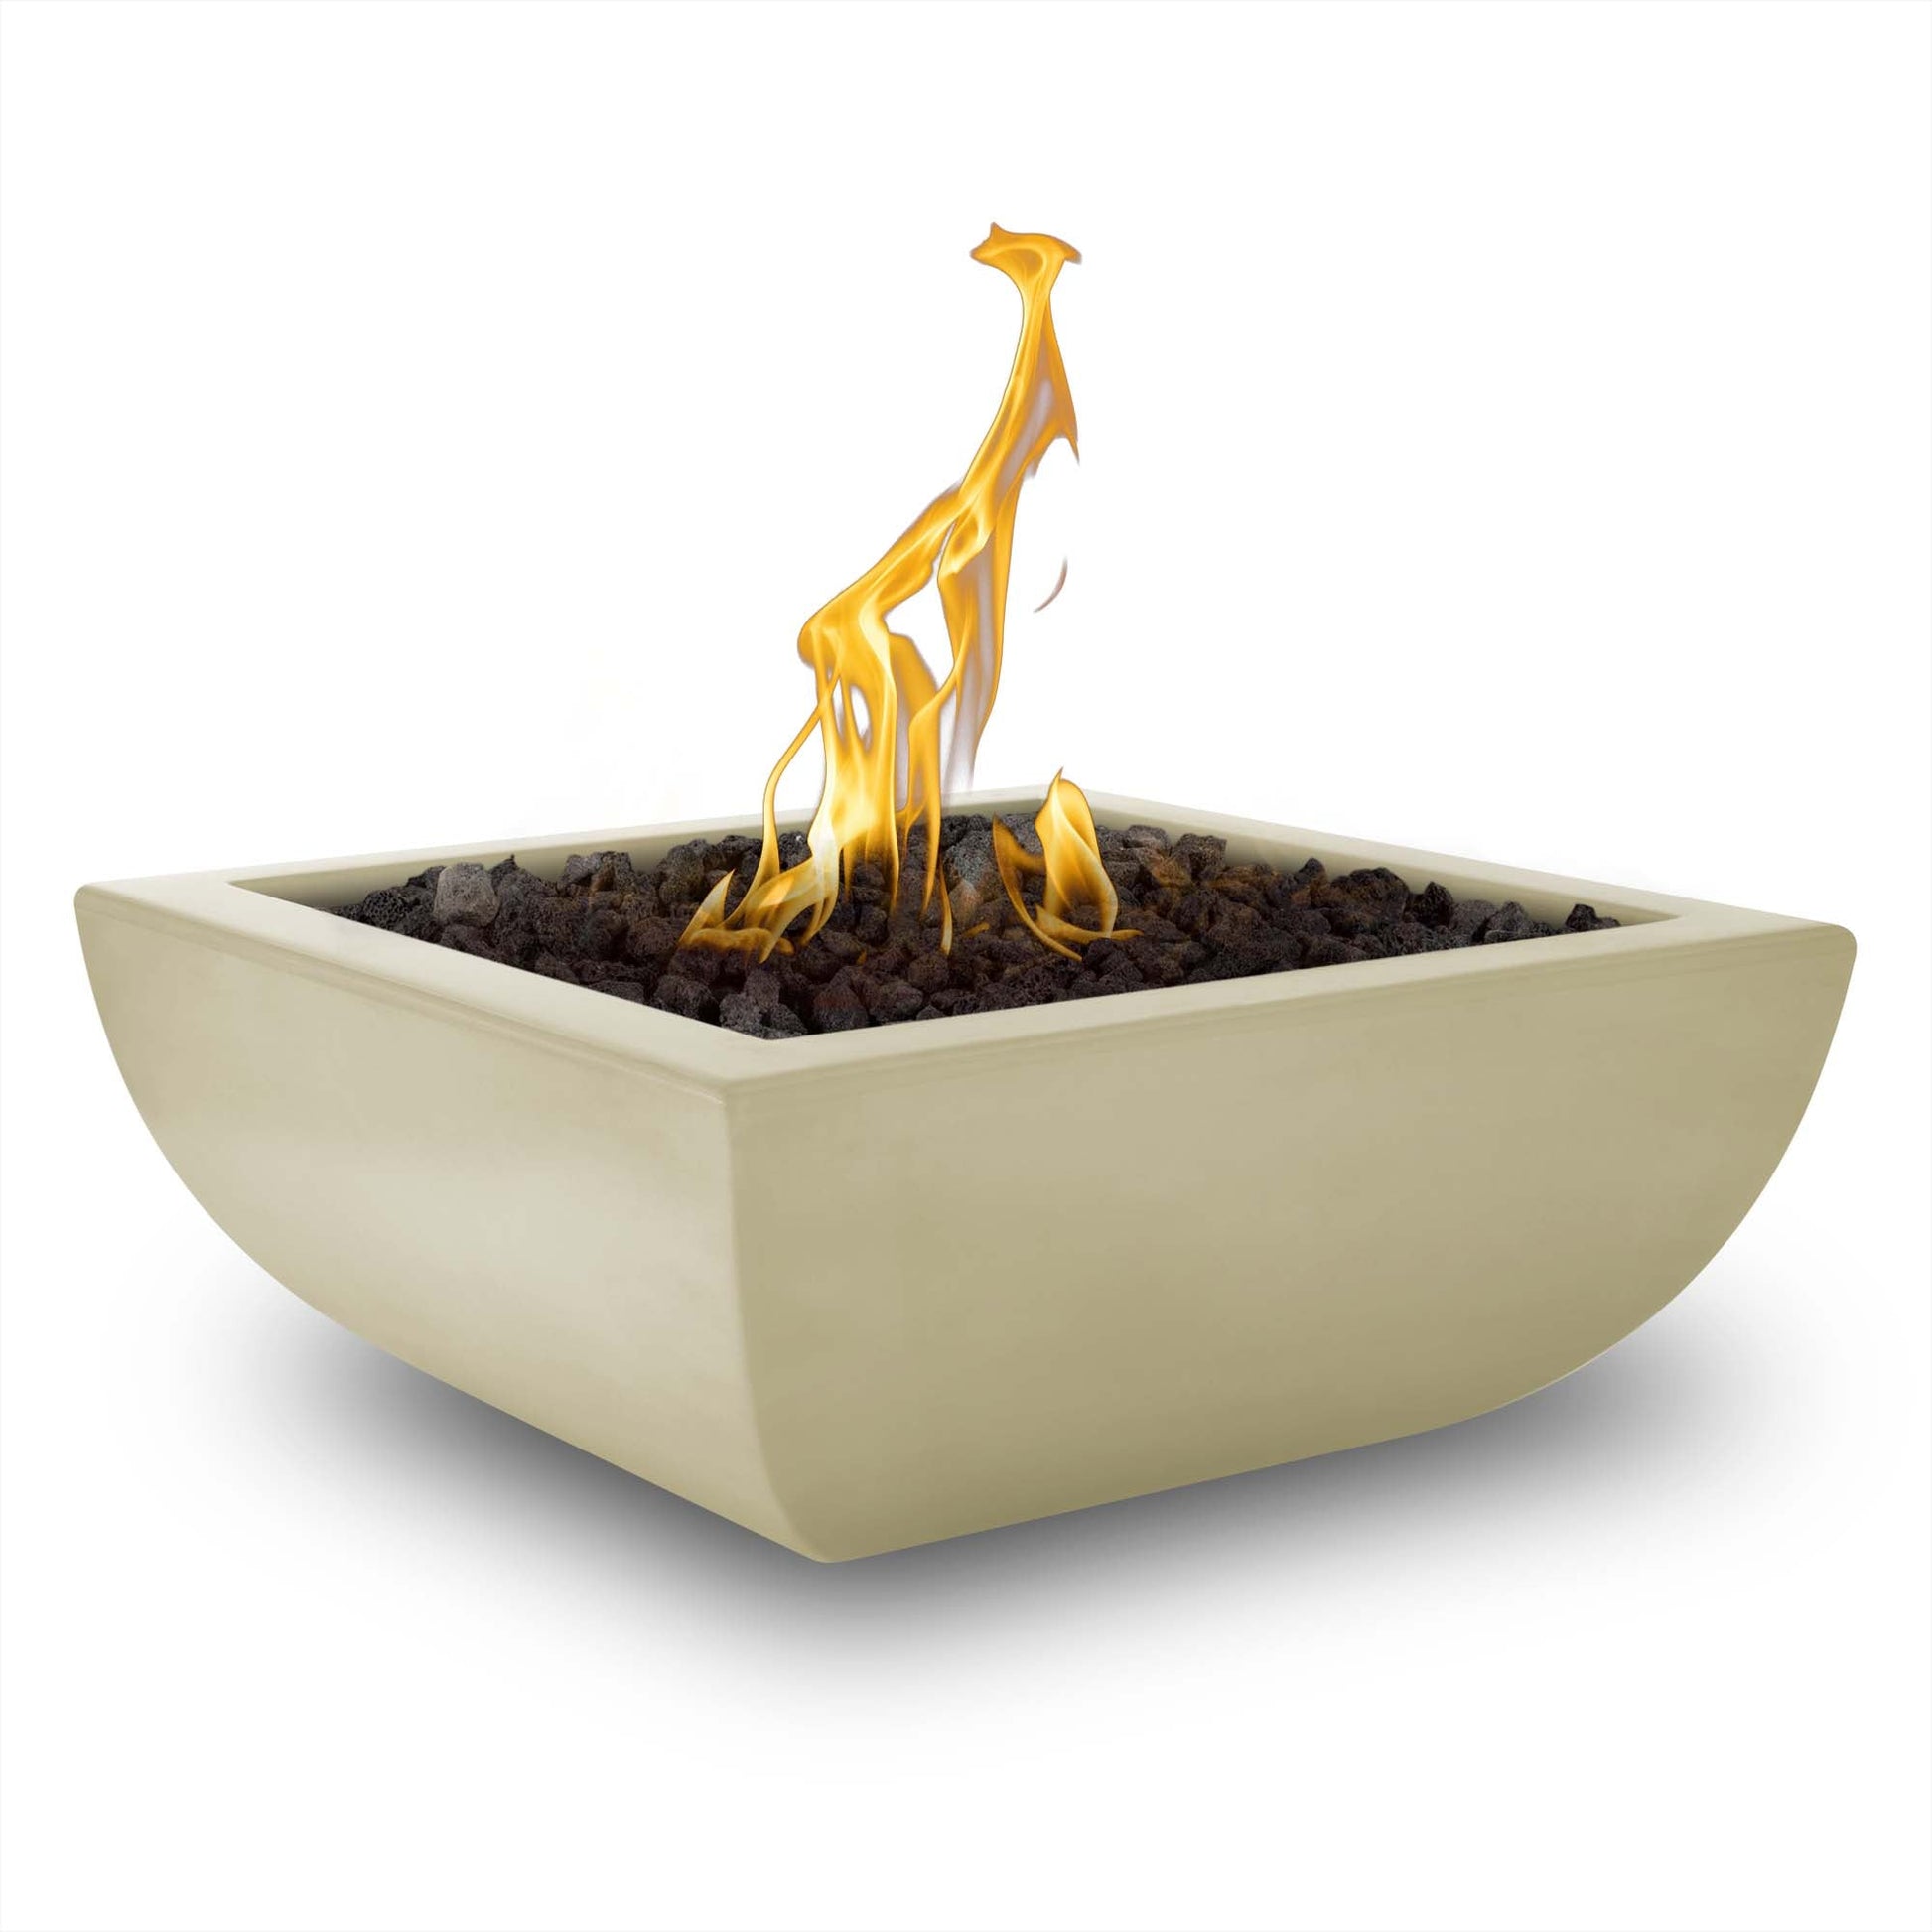 The Outdoor Plus Square Avalon 36" White GFRC Concrete Liquid Propane Fire Bowl with Match Lit with Flame Sense Ignition